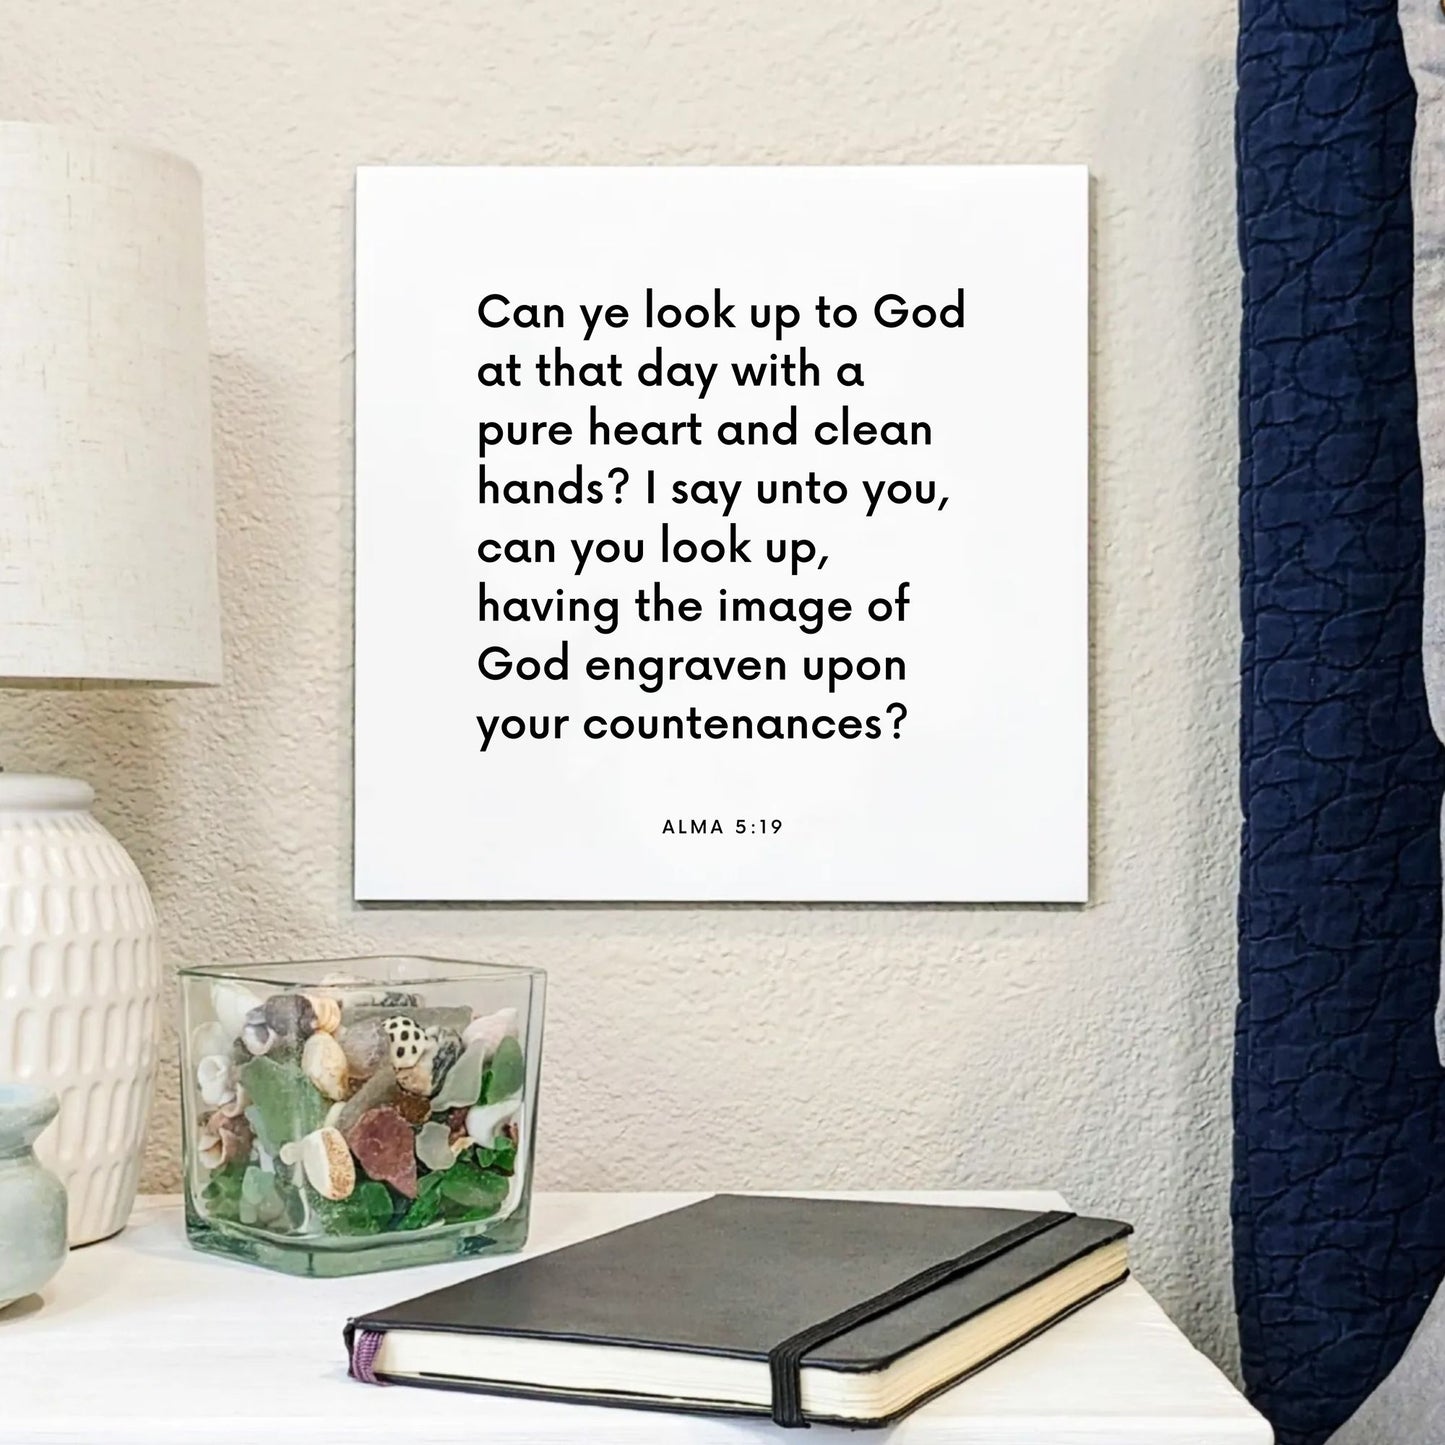 Bedside mouting of the scripture tile for Alma 5:19 - "The image of God engraven upon your countenances"